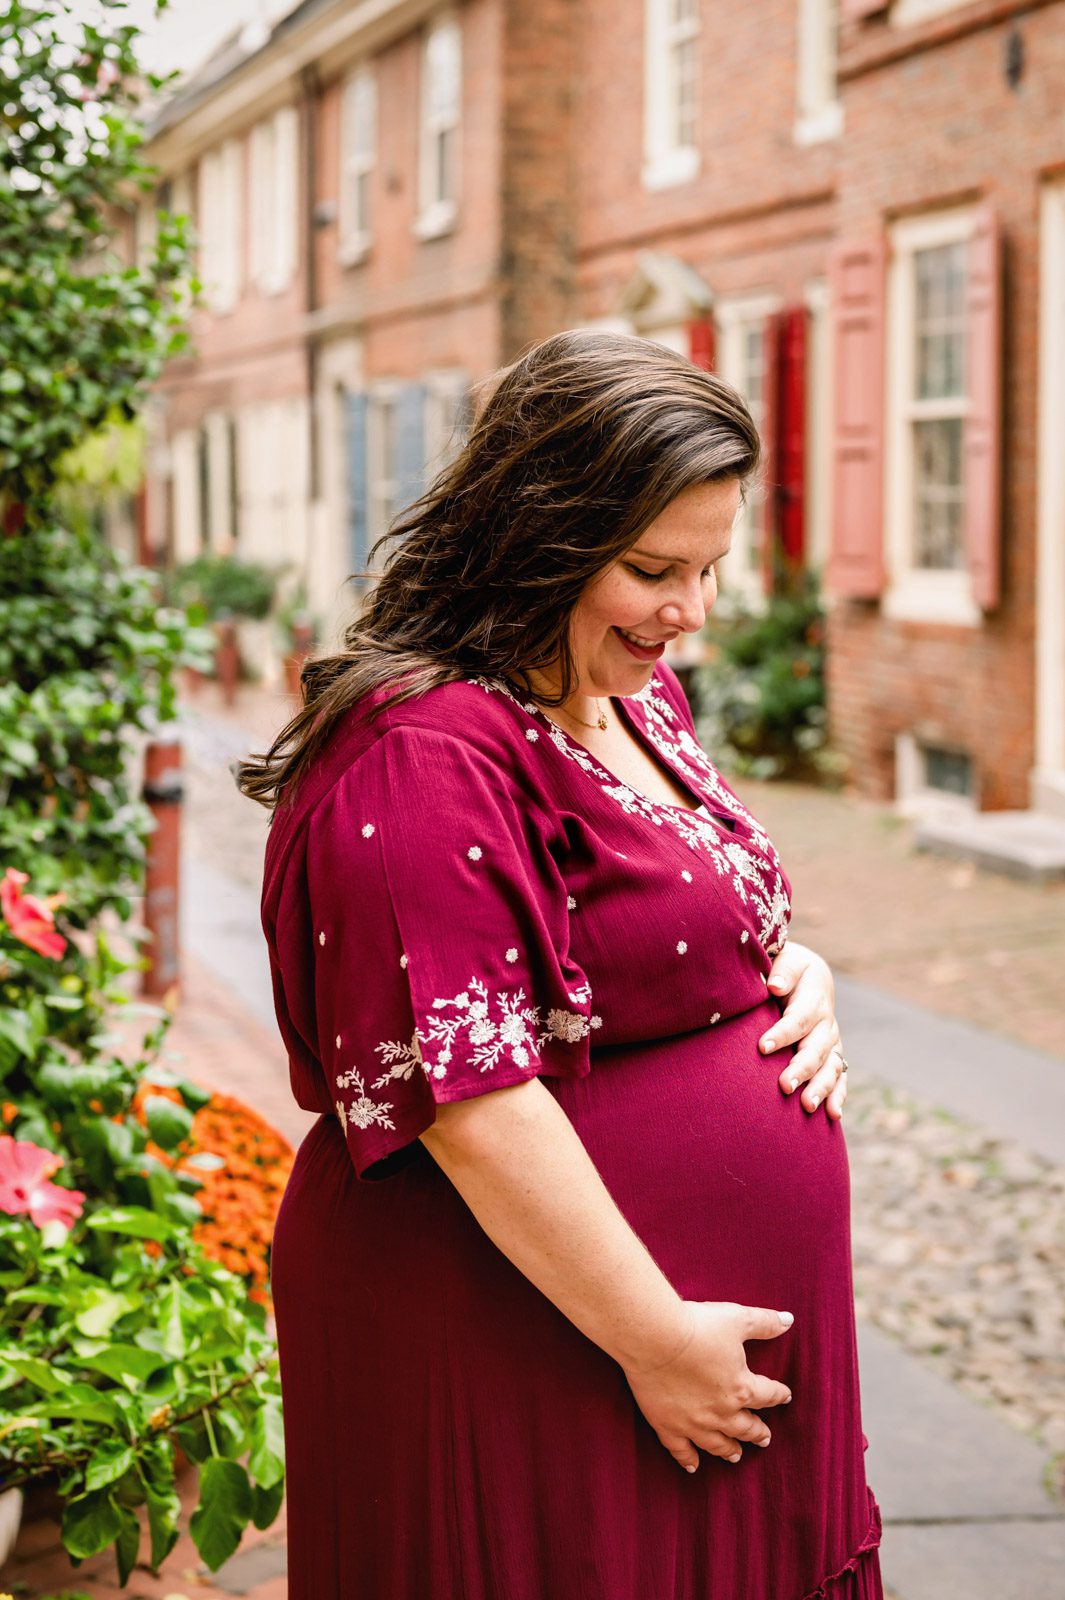 An expecting mother smiling down at her belly during a Philadelphia maternity photo session